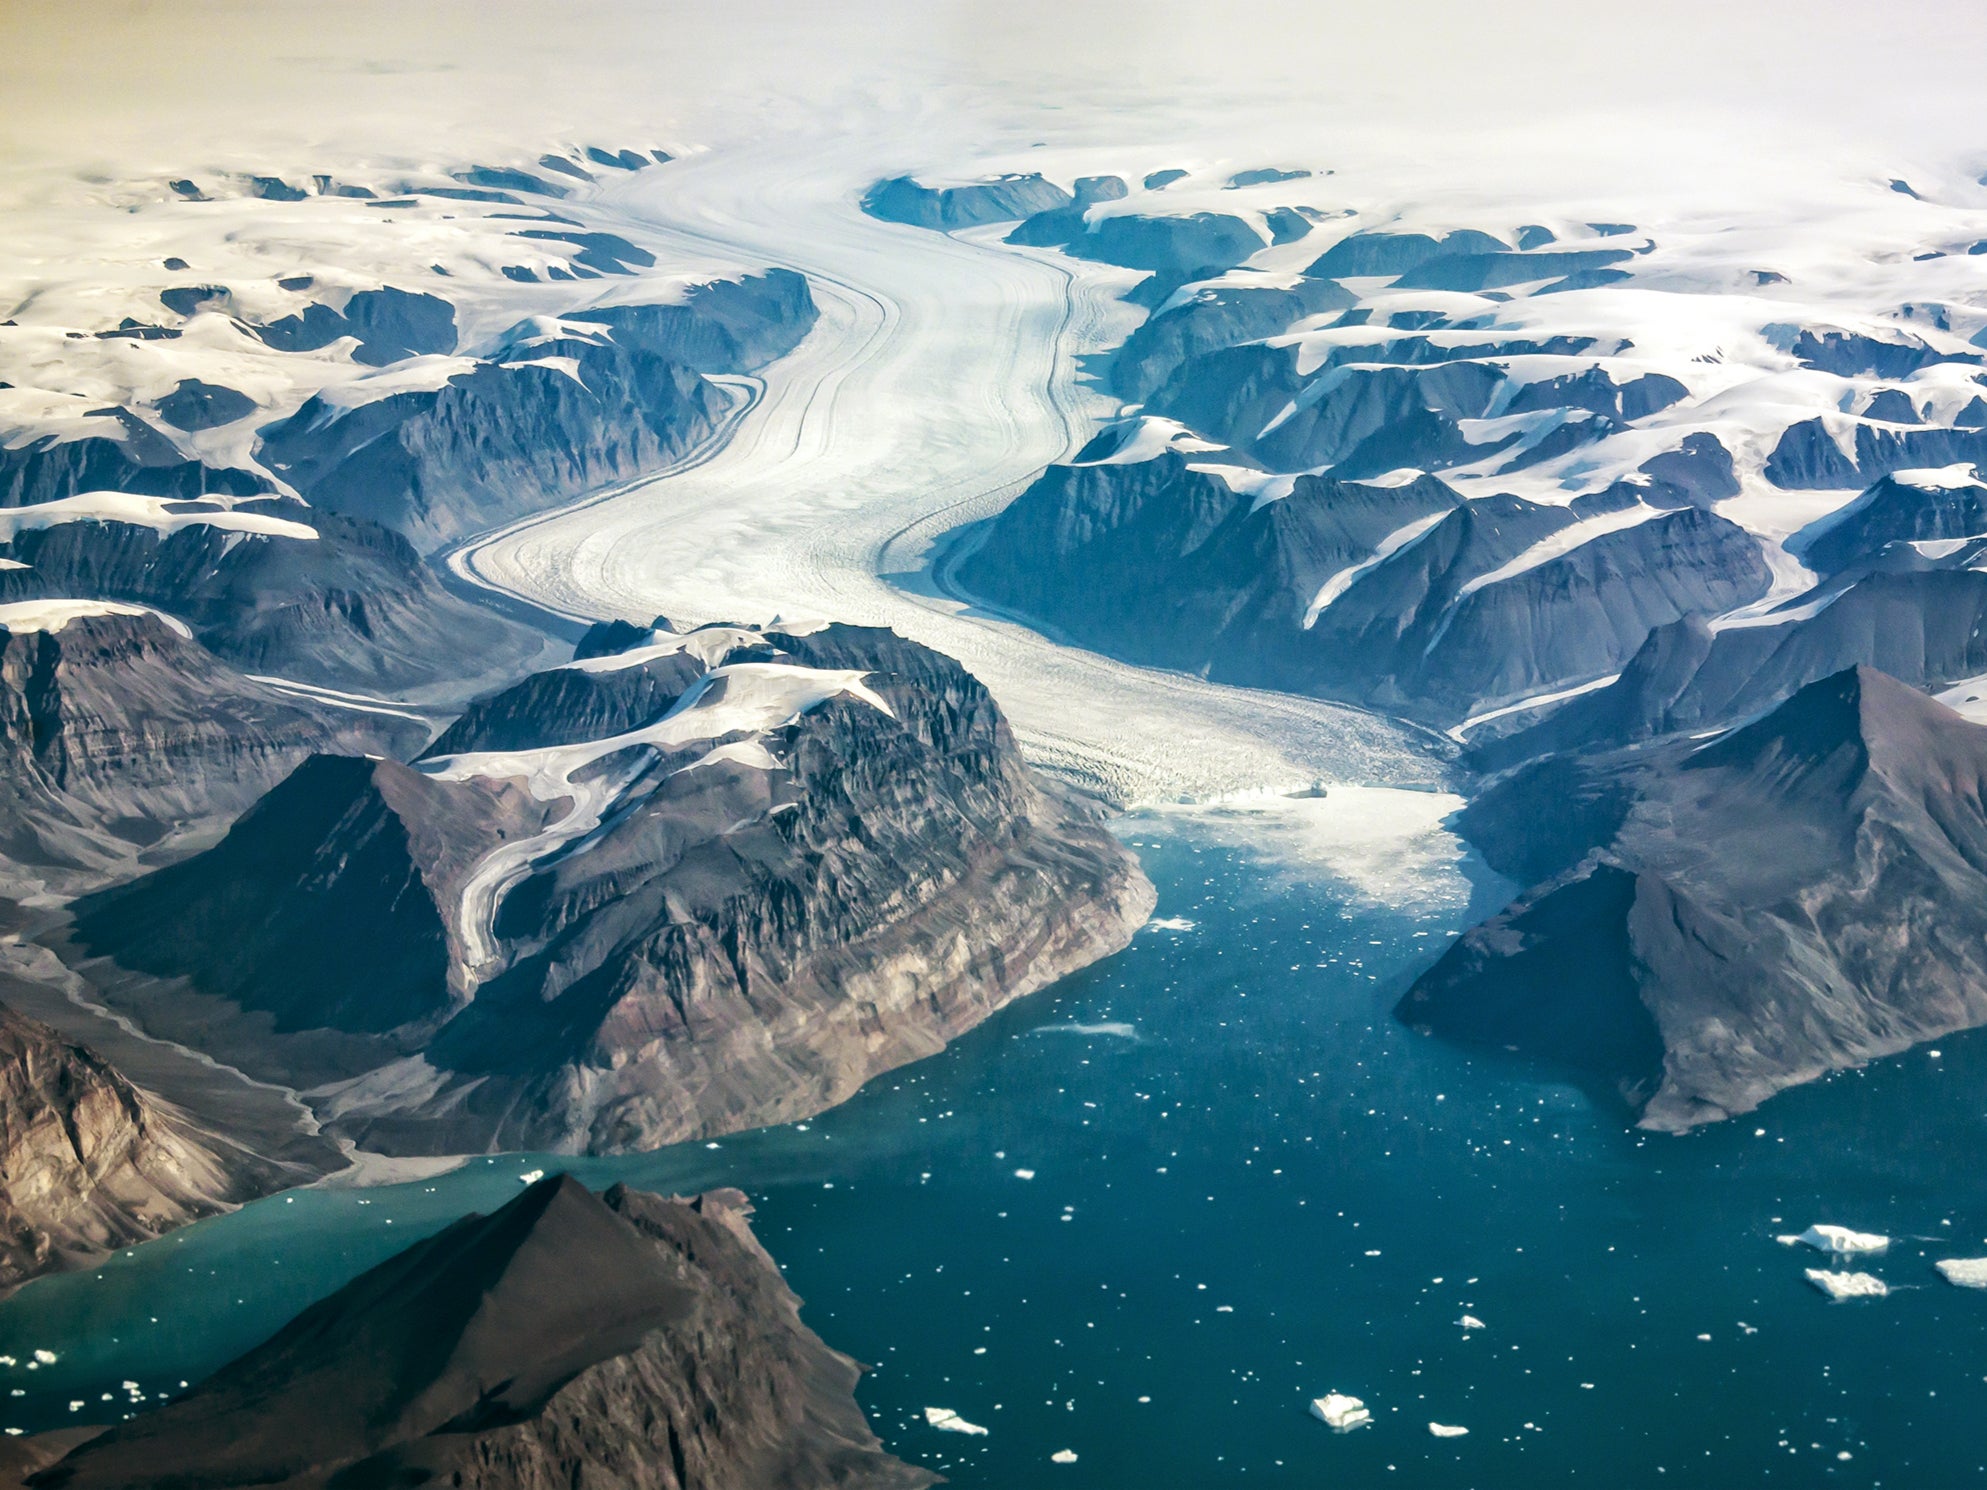 Greenland's ice sheet is melting at an unprecedented rate, detailed new modelling has revealed